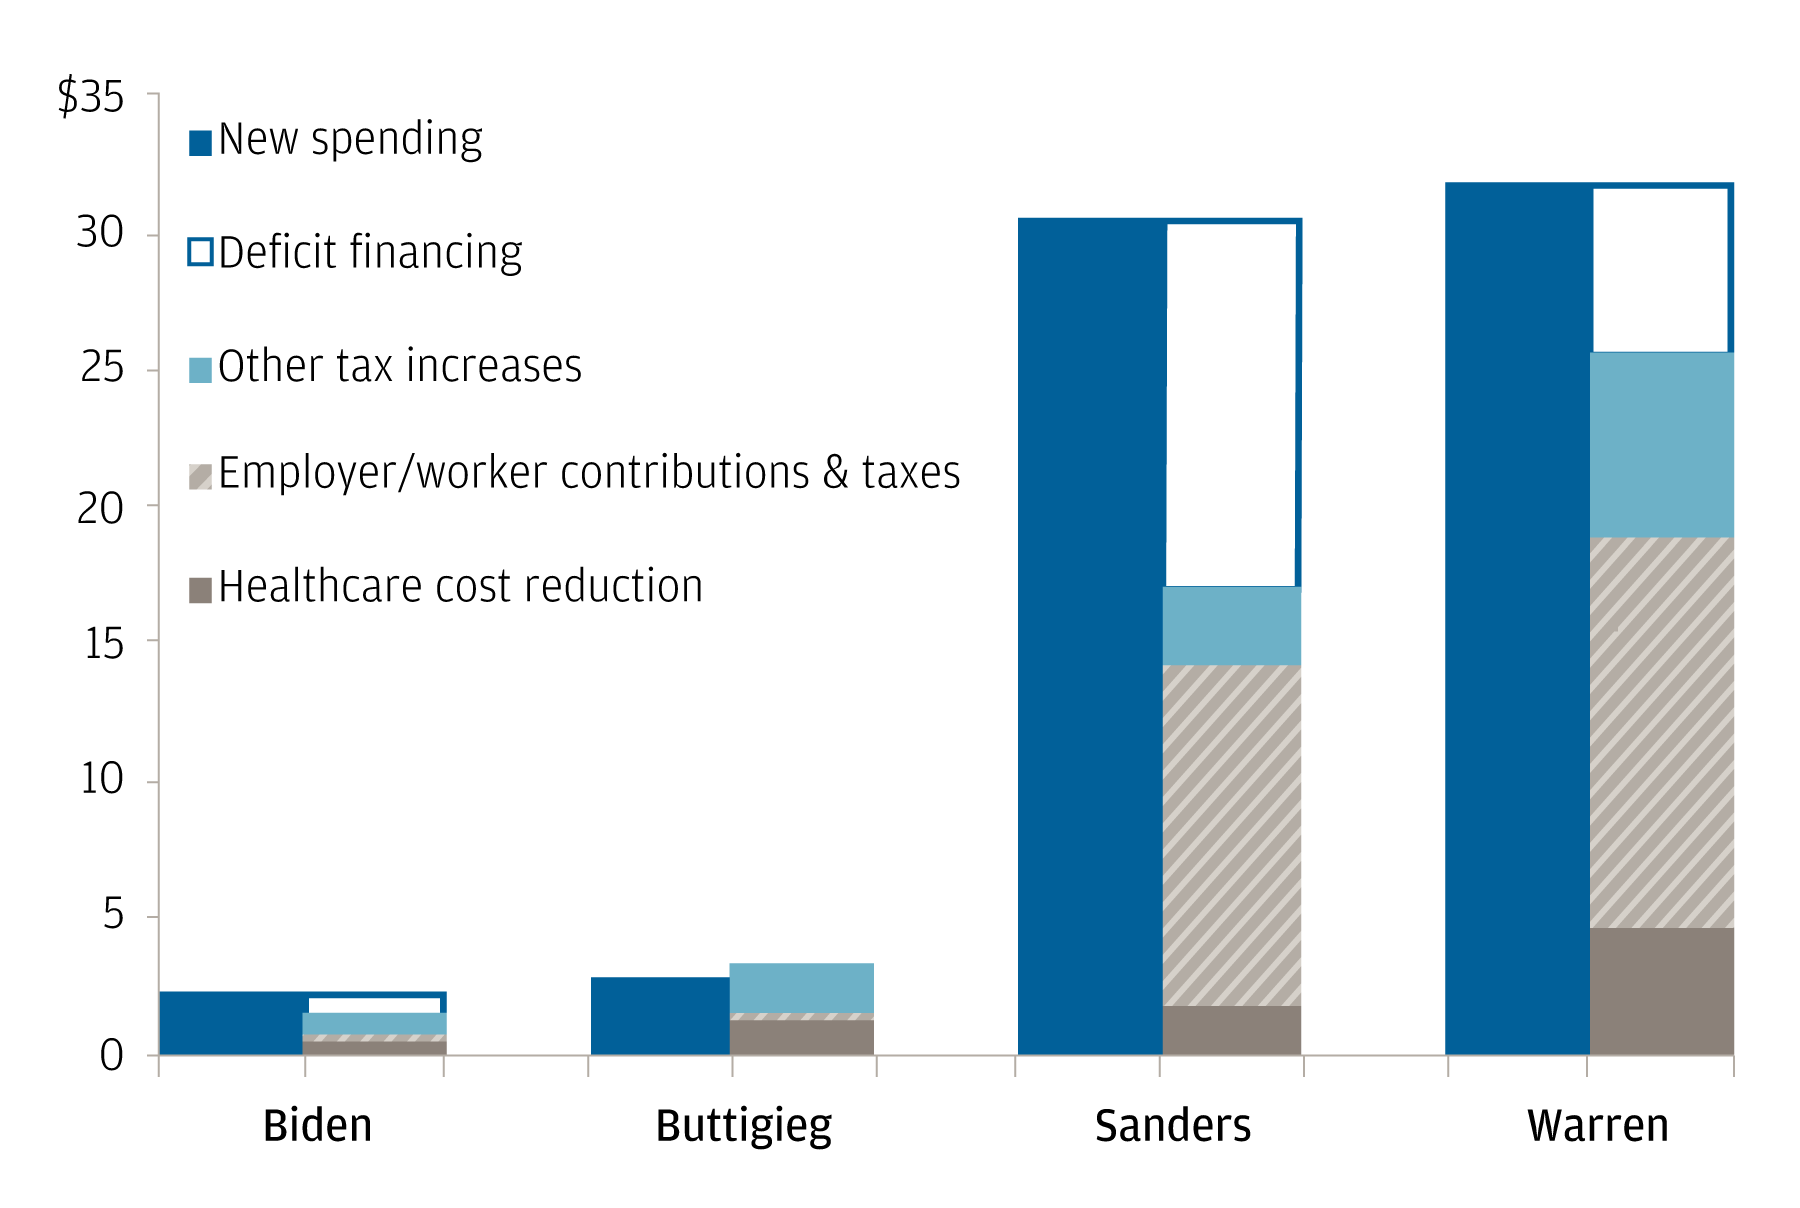 Bar chart compares four U.S. presidential candidates—Biden, Buttigieg, Sanders and Warren—in the amount each would spend (in trillions of U.S. dollars) in: New spending, deficit financing, other tax increases, employer/worker contributions & taxes, and healthcare cost reduction. The chart highlights that Sanders and Warren are higher in all aspects compared to Biden and Buttigieg.